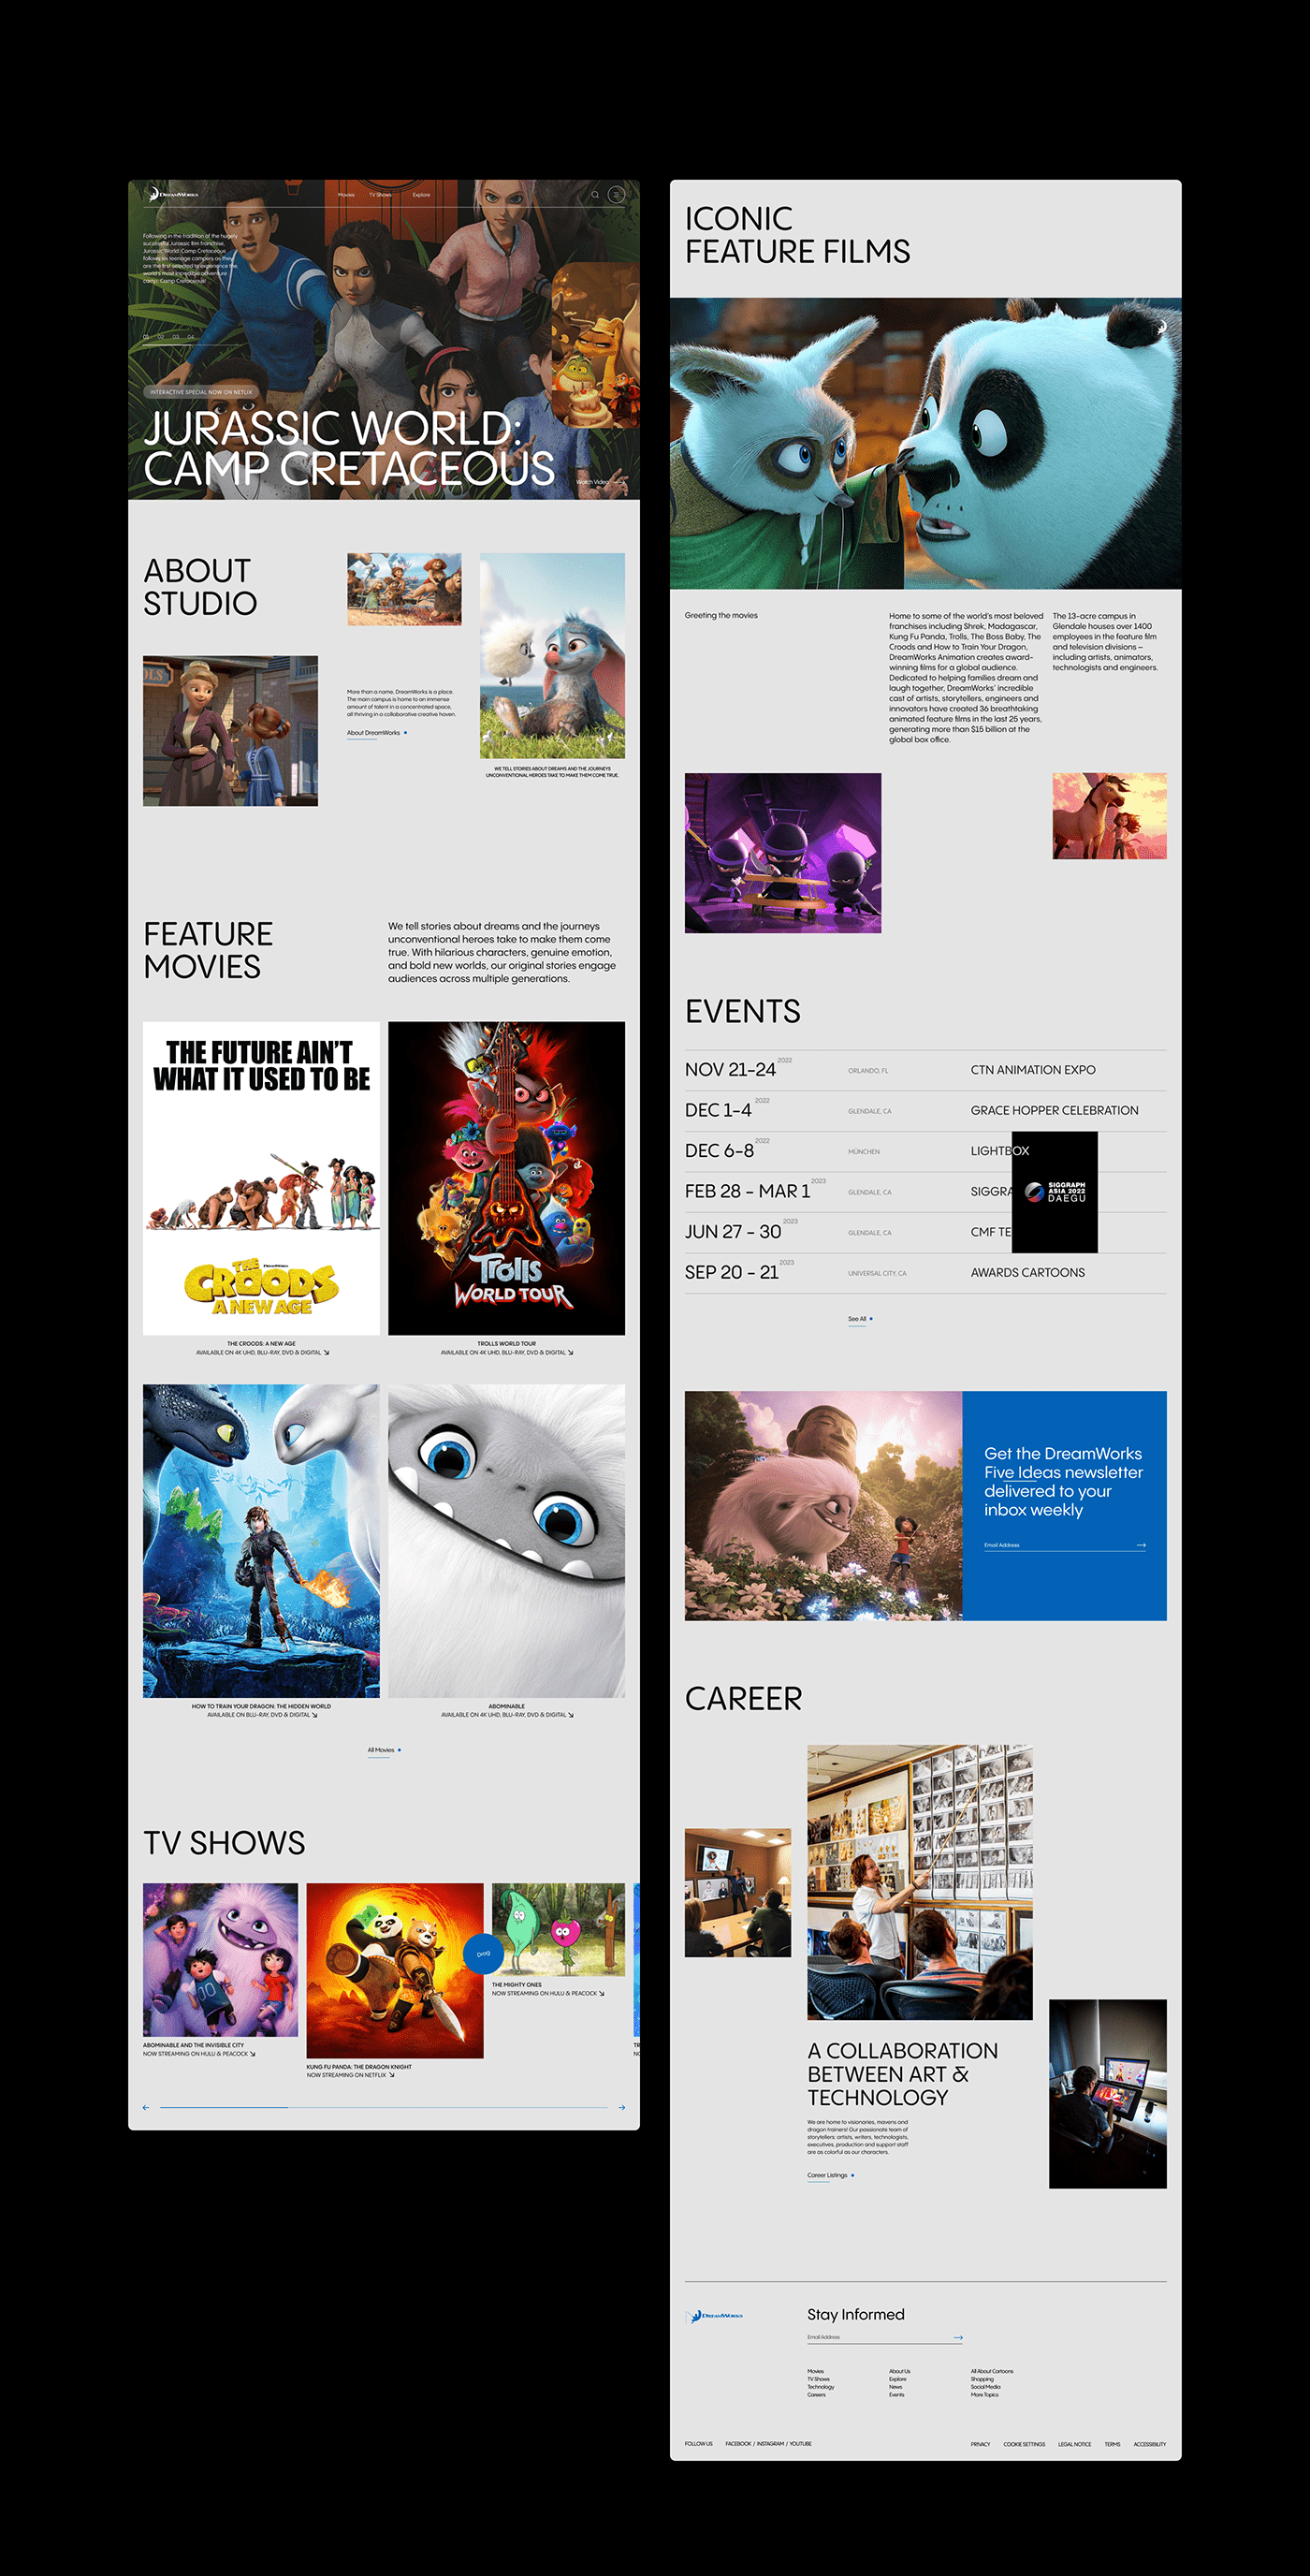 Website redesign DreamWorks Animation Studio. Home page.